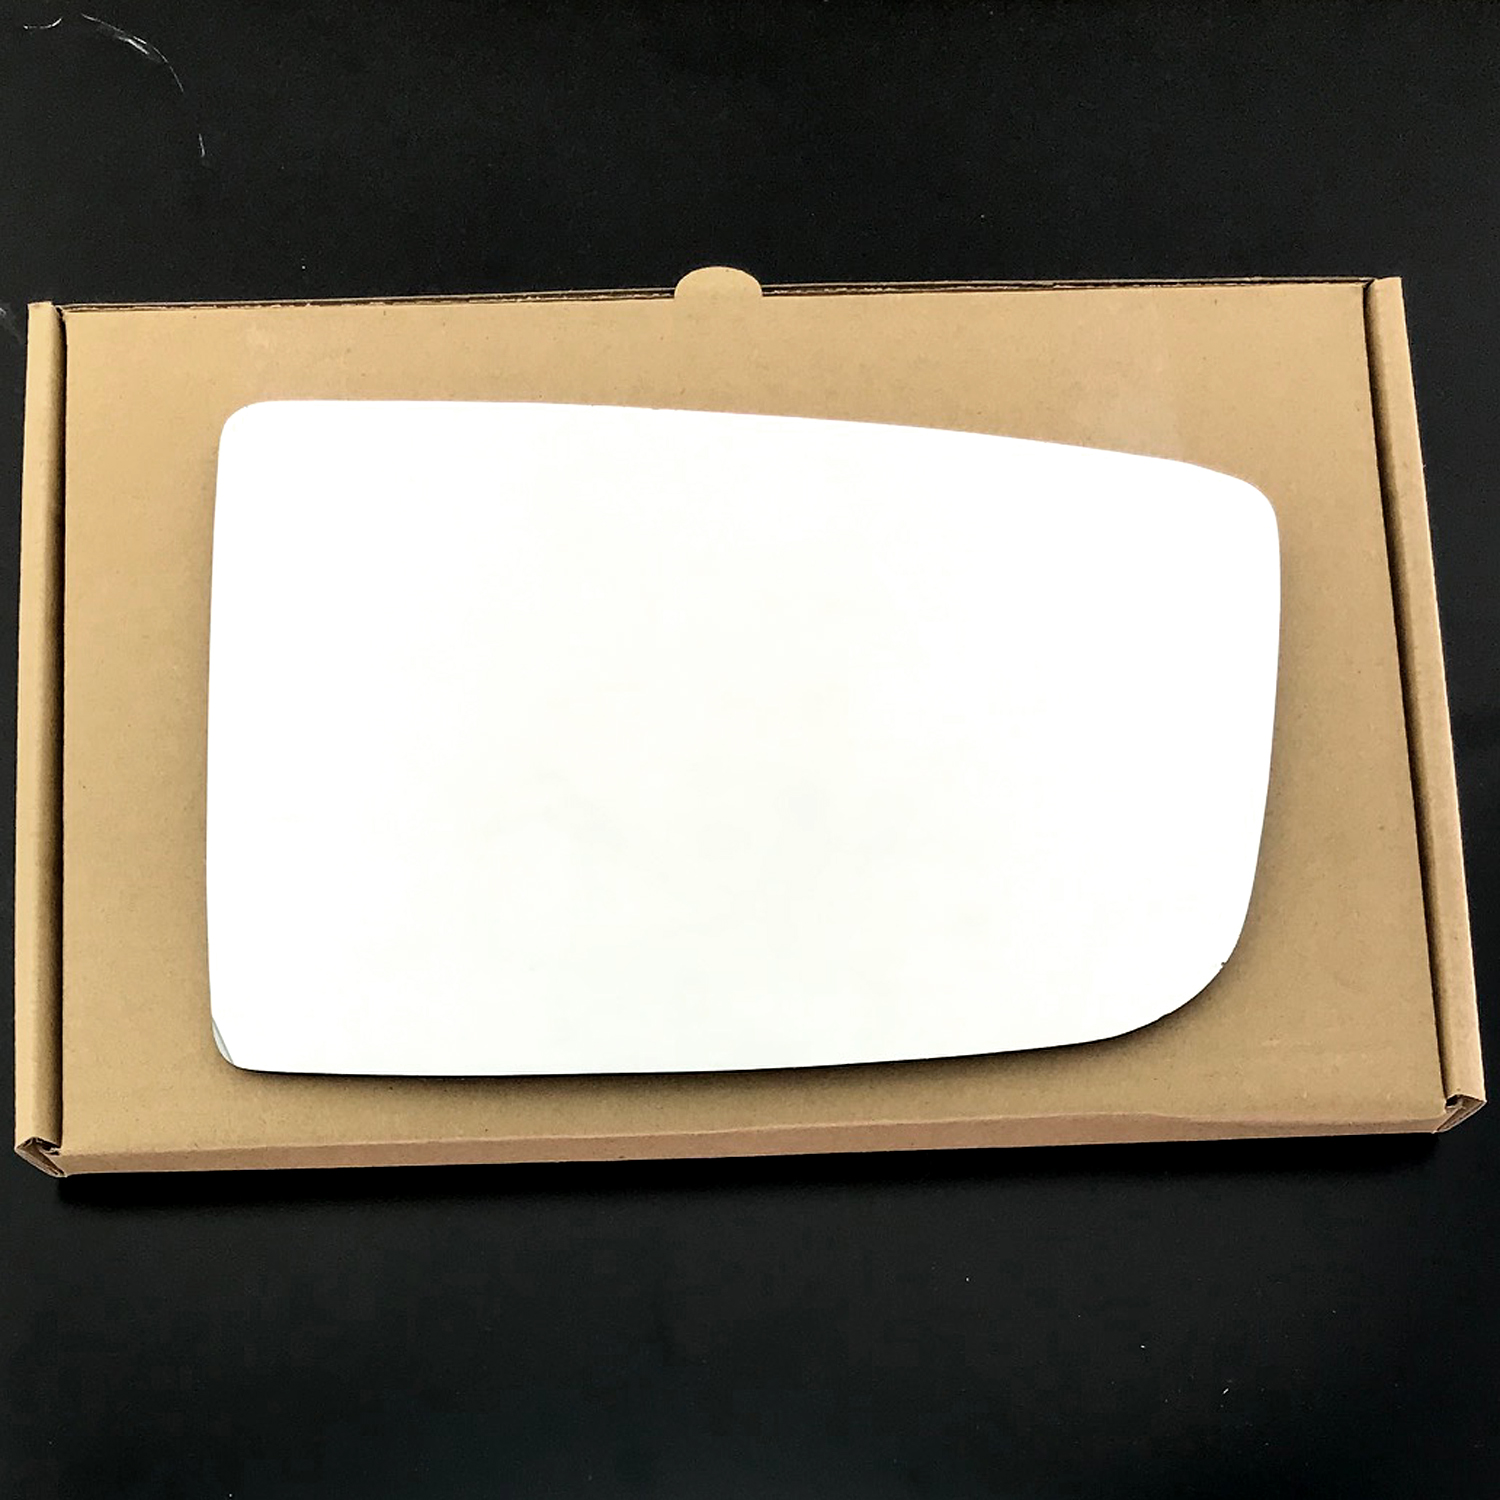 Mercedes Sprinter CHASSIS CAB Wing Mirror Glass RIGHT HAND ( UK Driver Side ) 2006 to 2011 – Convex Wing Mirror